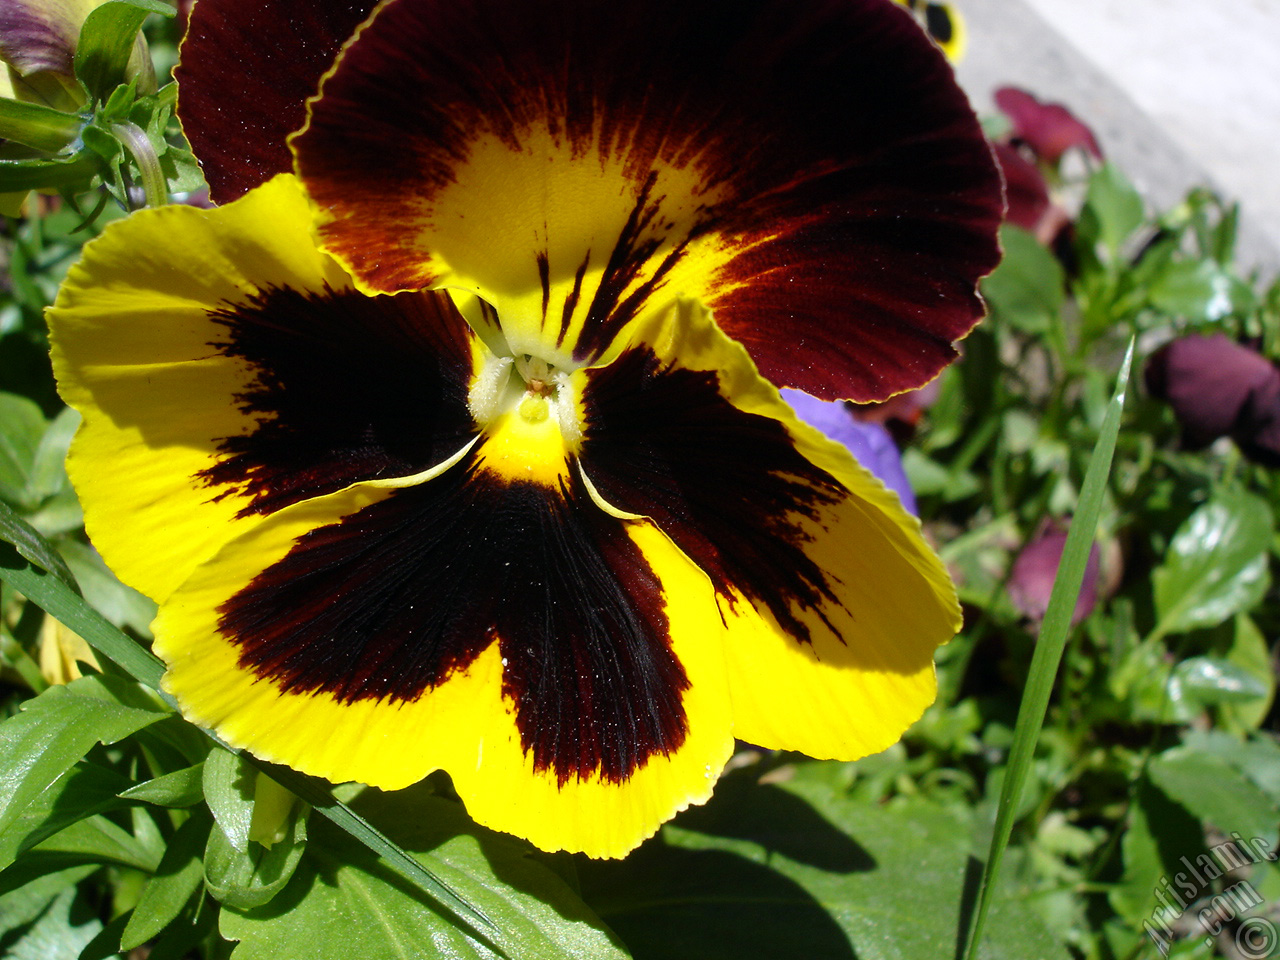 Yellow color Viola Tricolor -Heartsease, Pansy, Multicoloured Violet, Johnny Jump Up- flower.
